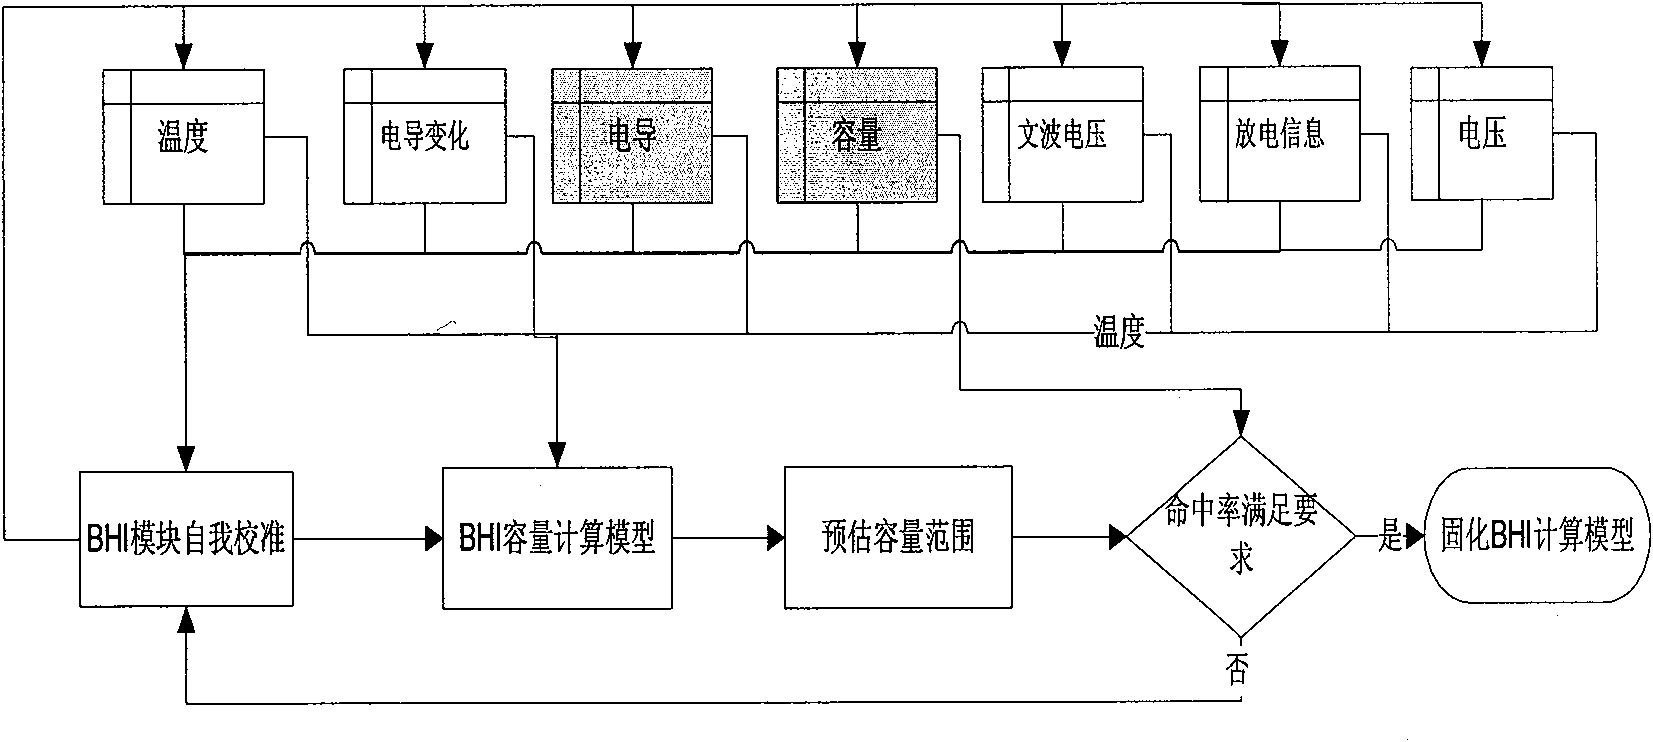 Method and system for judging storage battery capacity and health